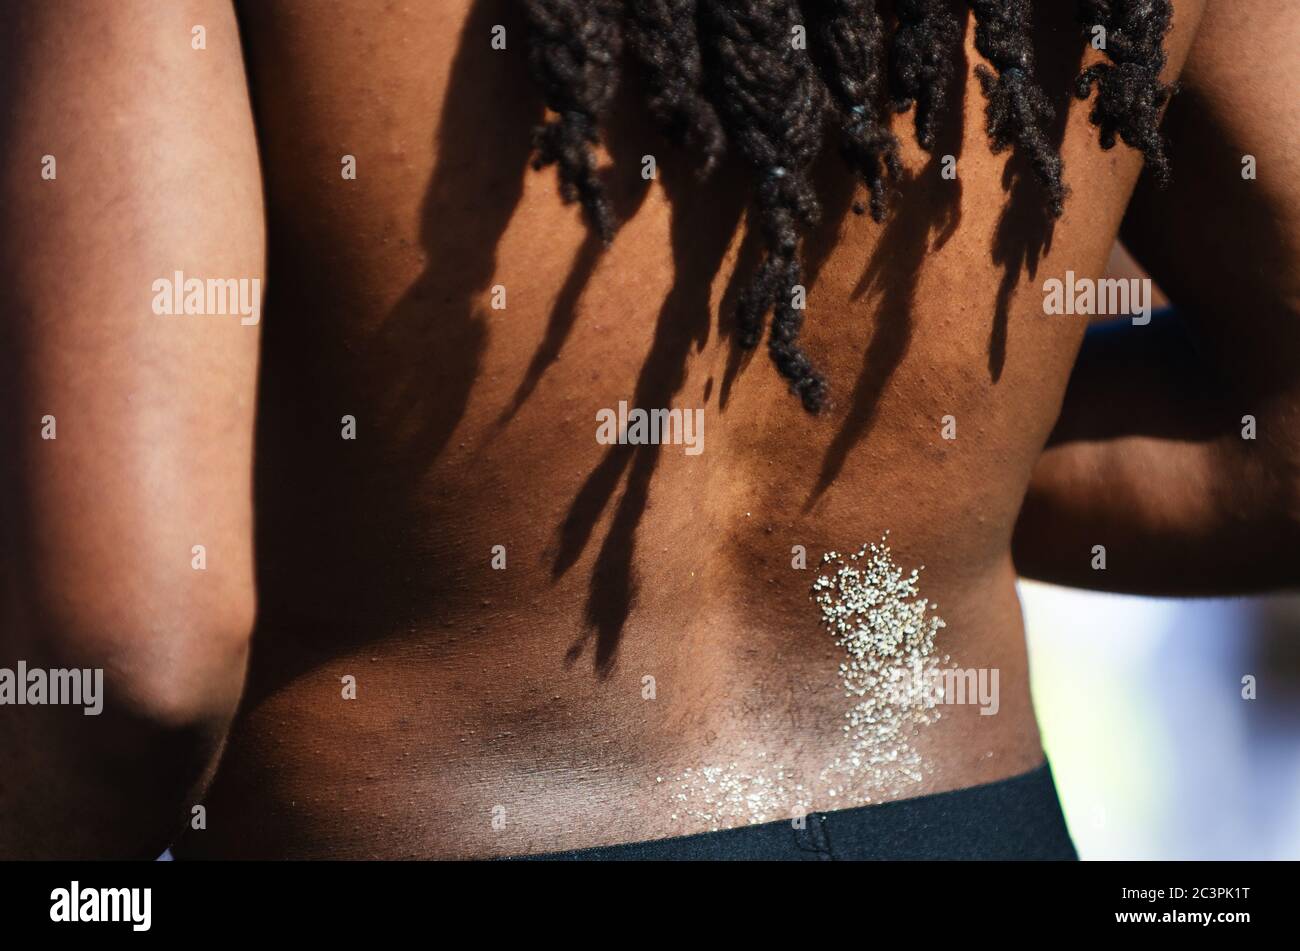 Close-up of a sandy back with dreadlocks casting shadows on brown skin on the back of an American man at the beach in Miami, Florida, USA Stock Photo